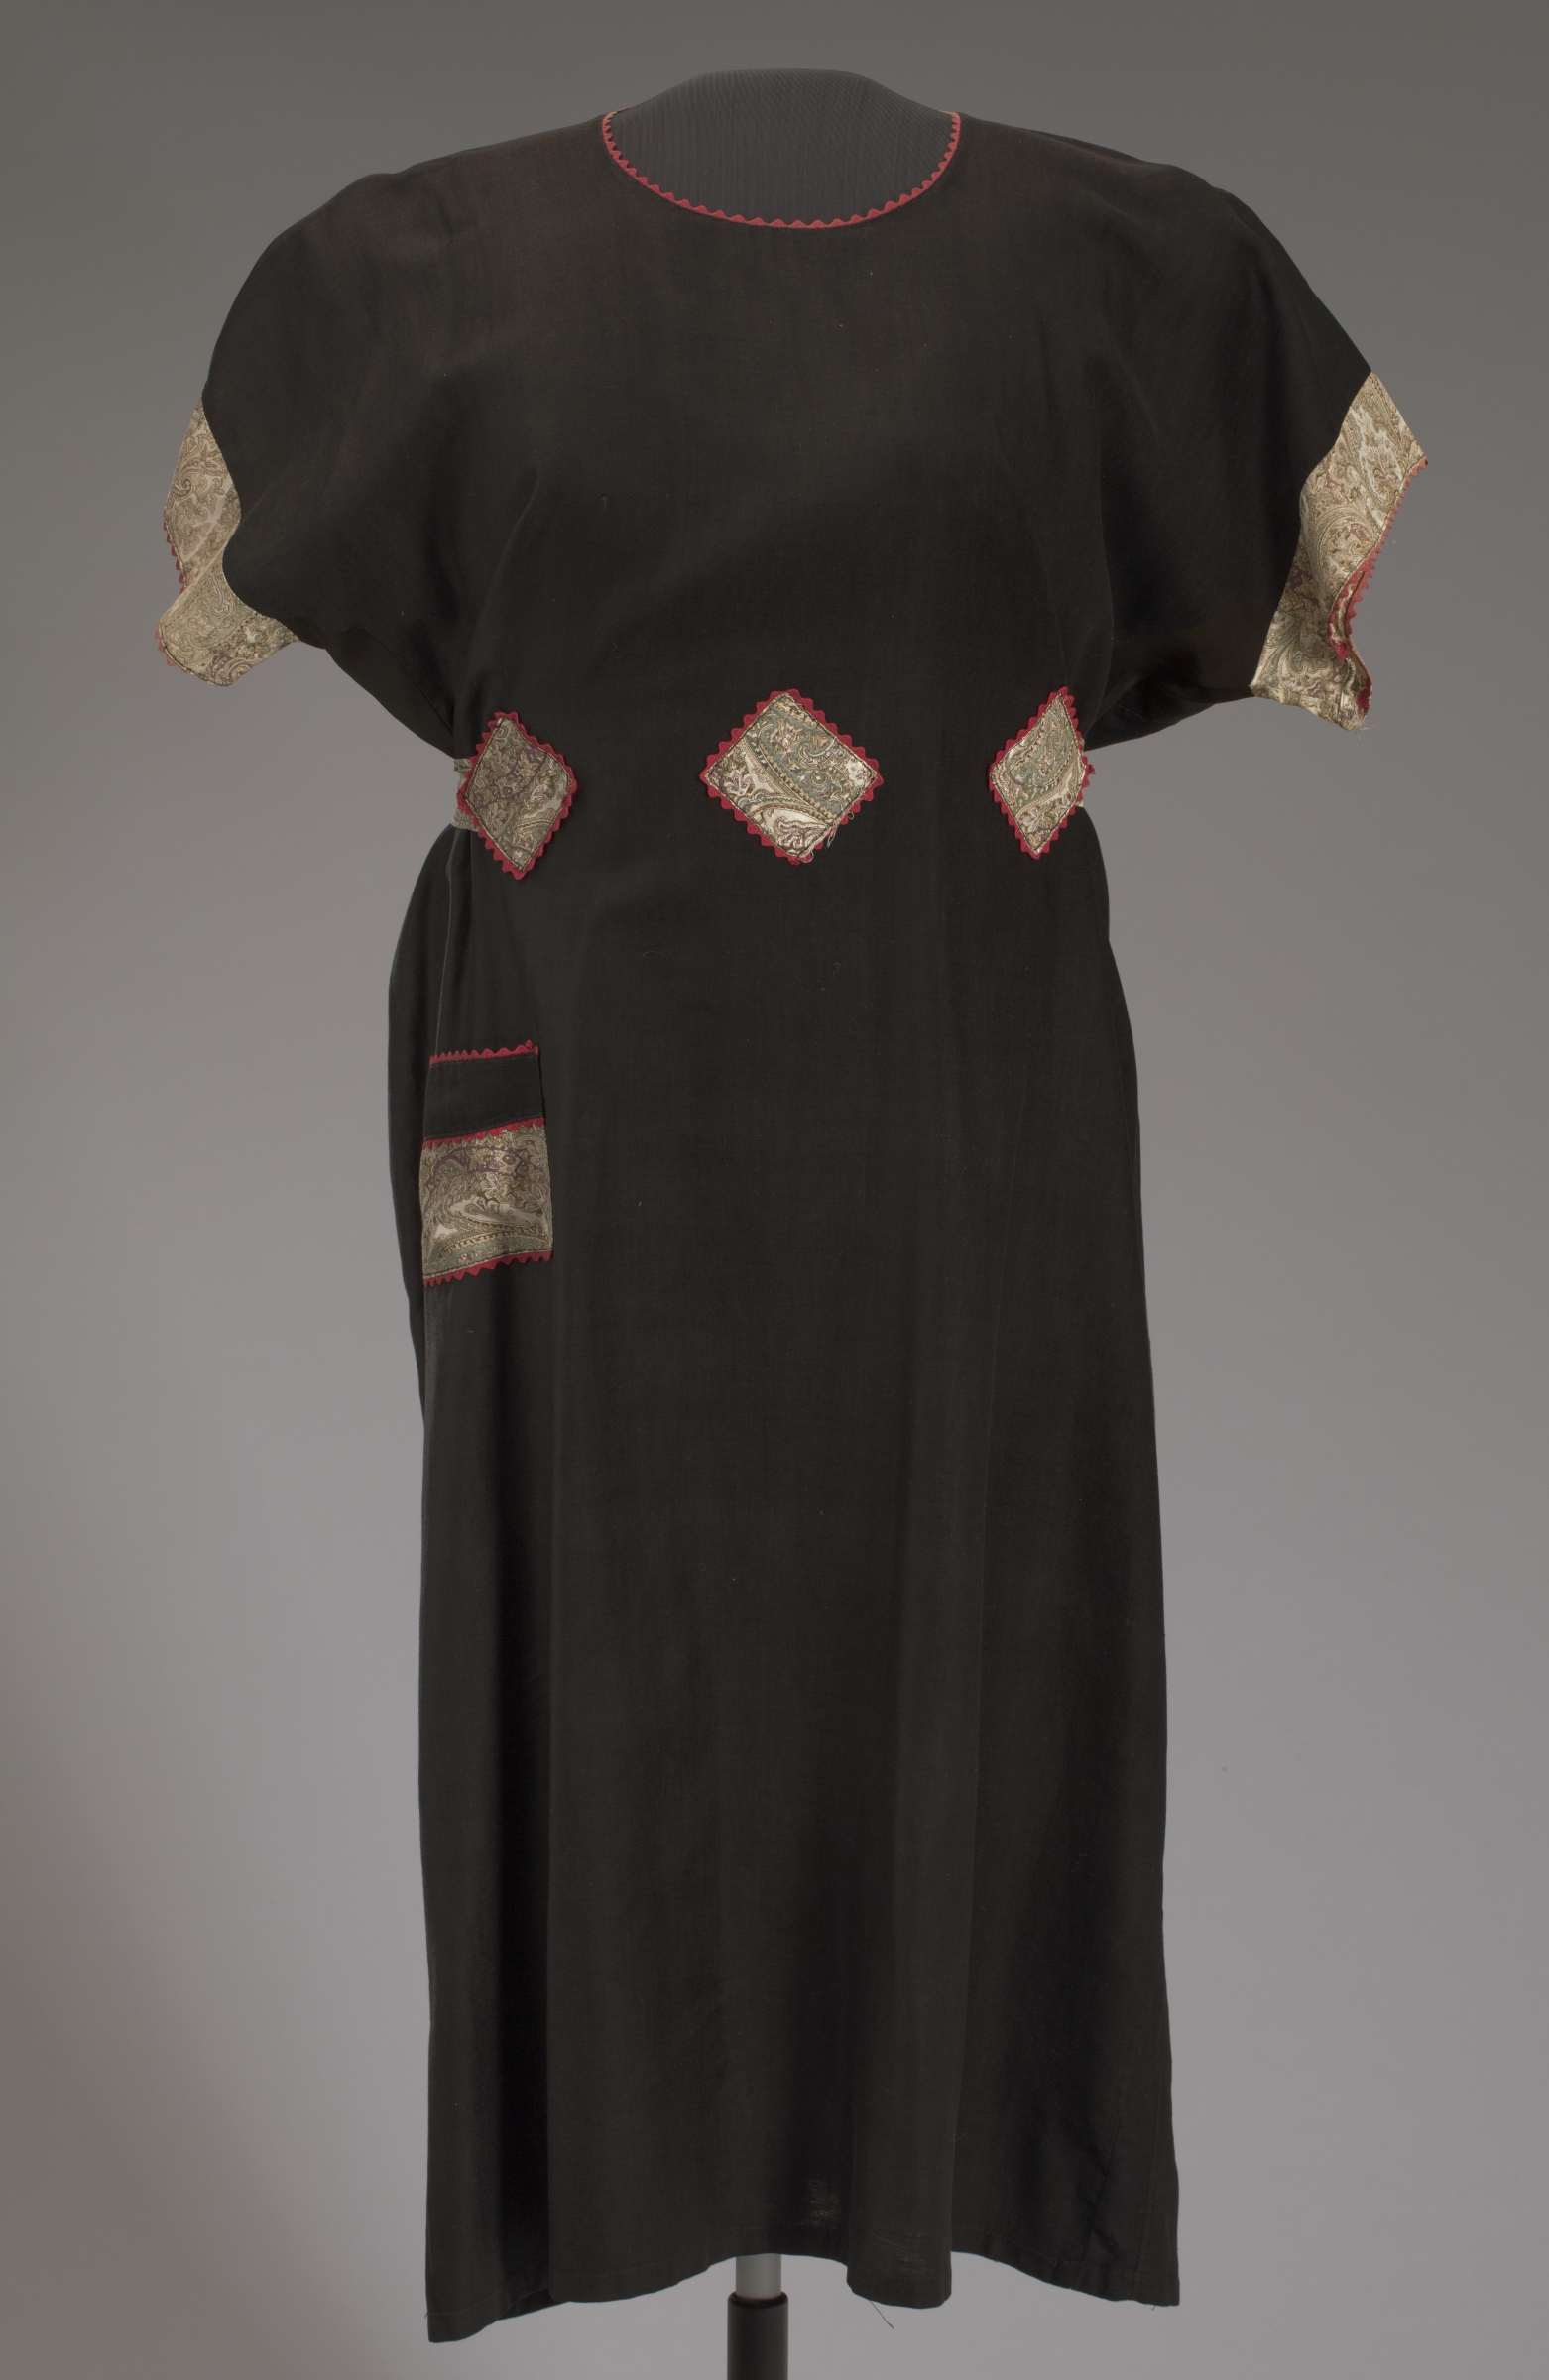 Long black frock with red emroidered detail around neckline.